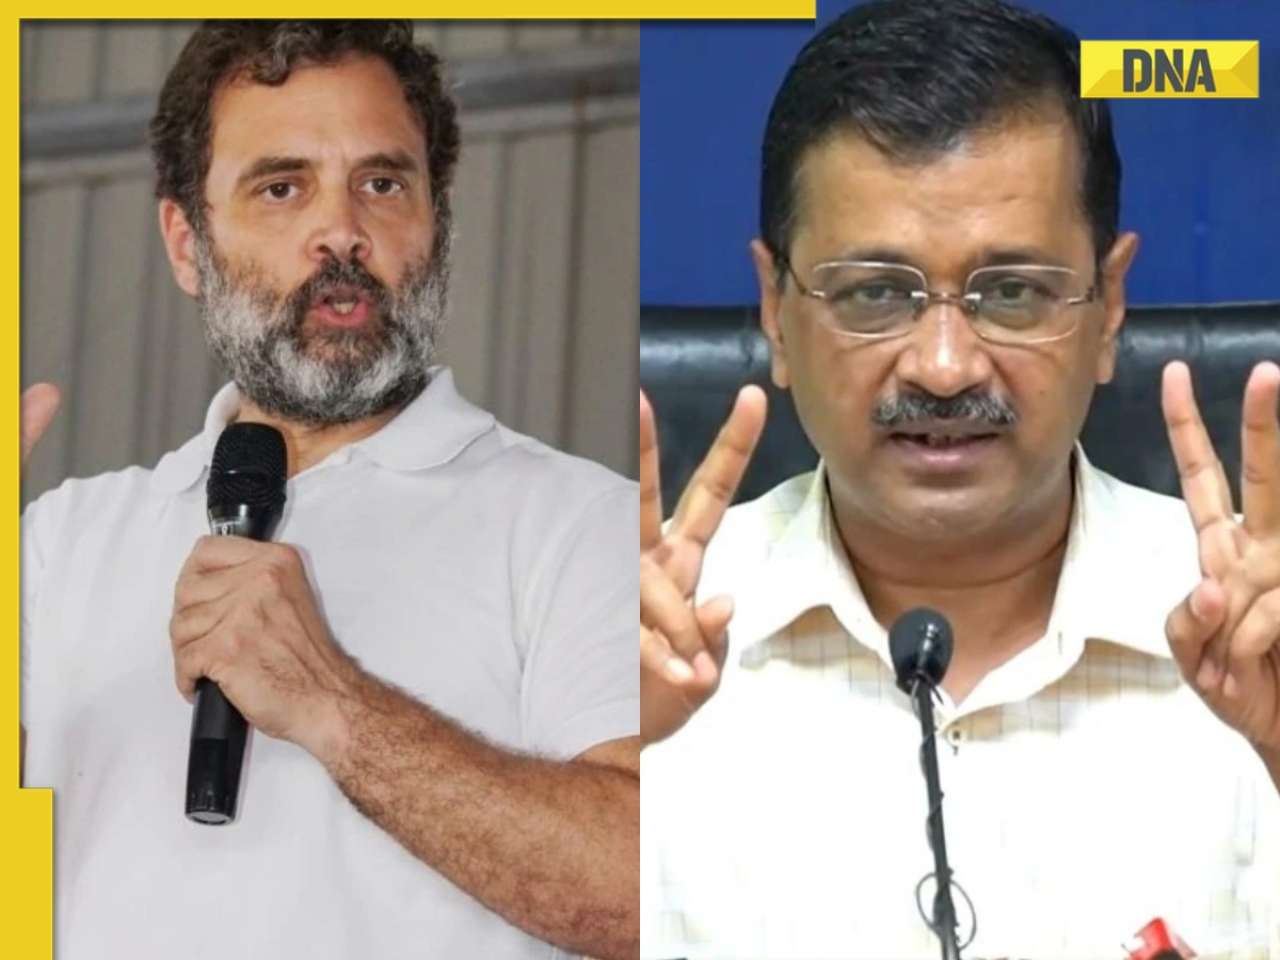 Trouble in INDIA Bloc? AAP leader claims party to contest Delhi Assembly Polls on its own, no alliance with Congress